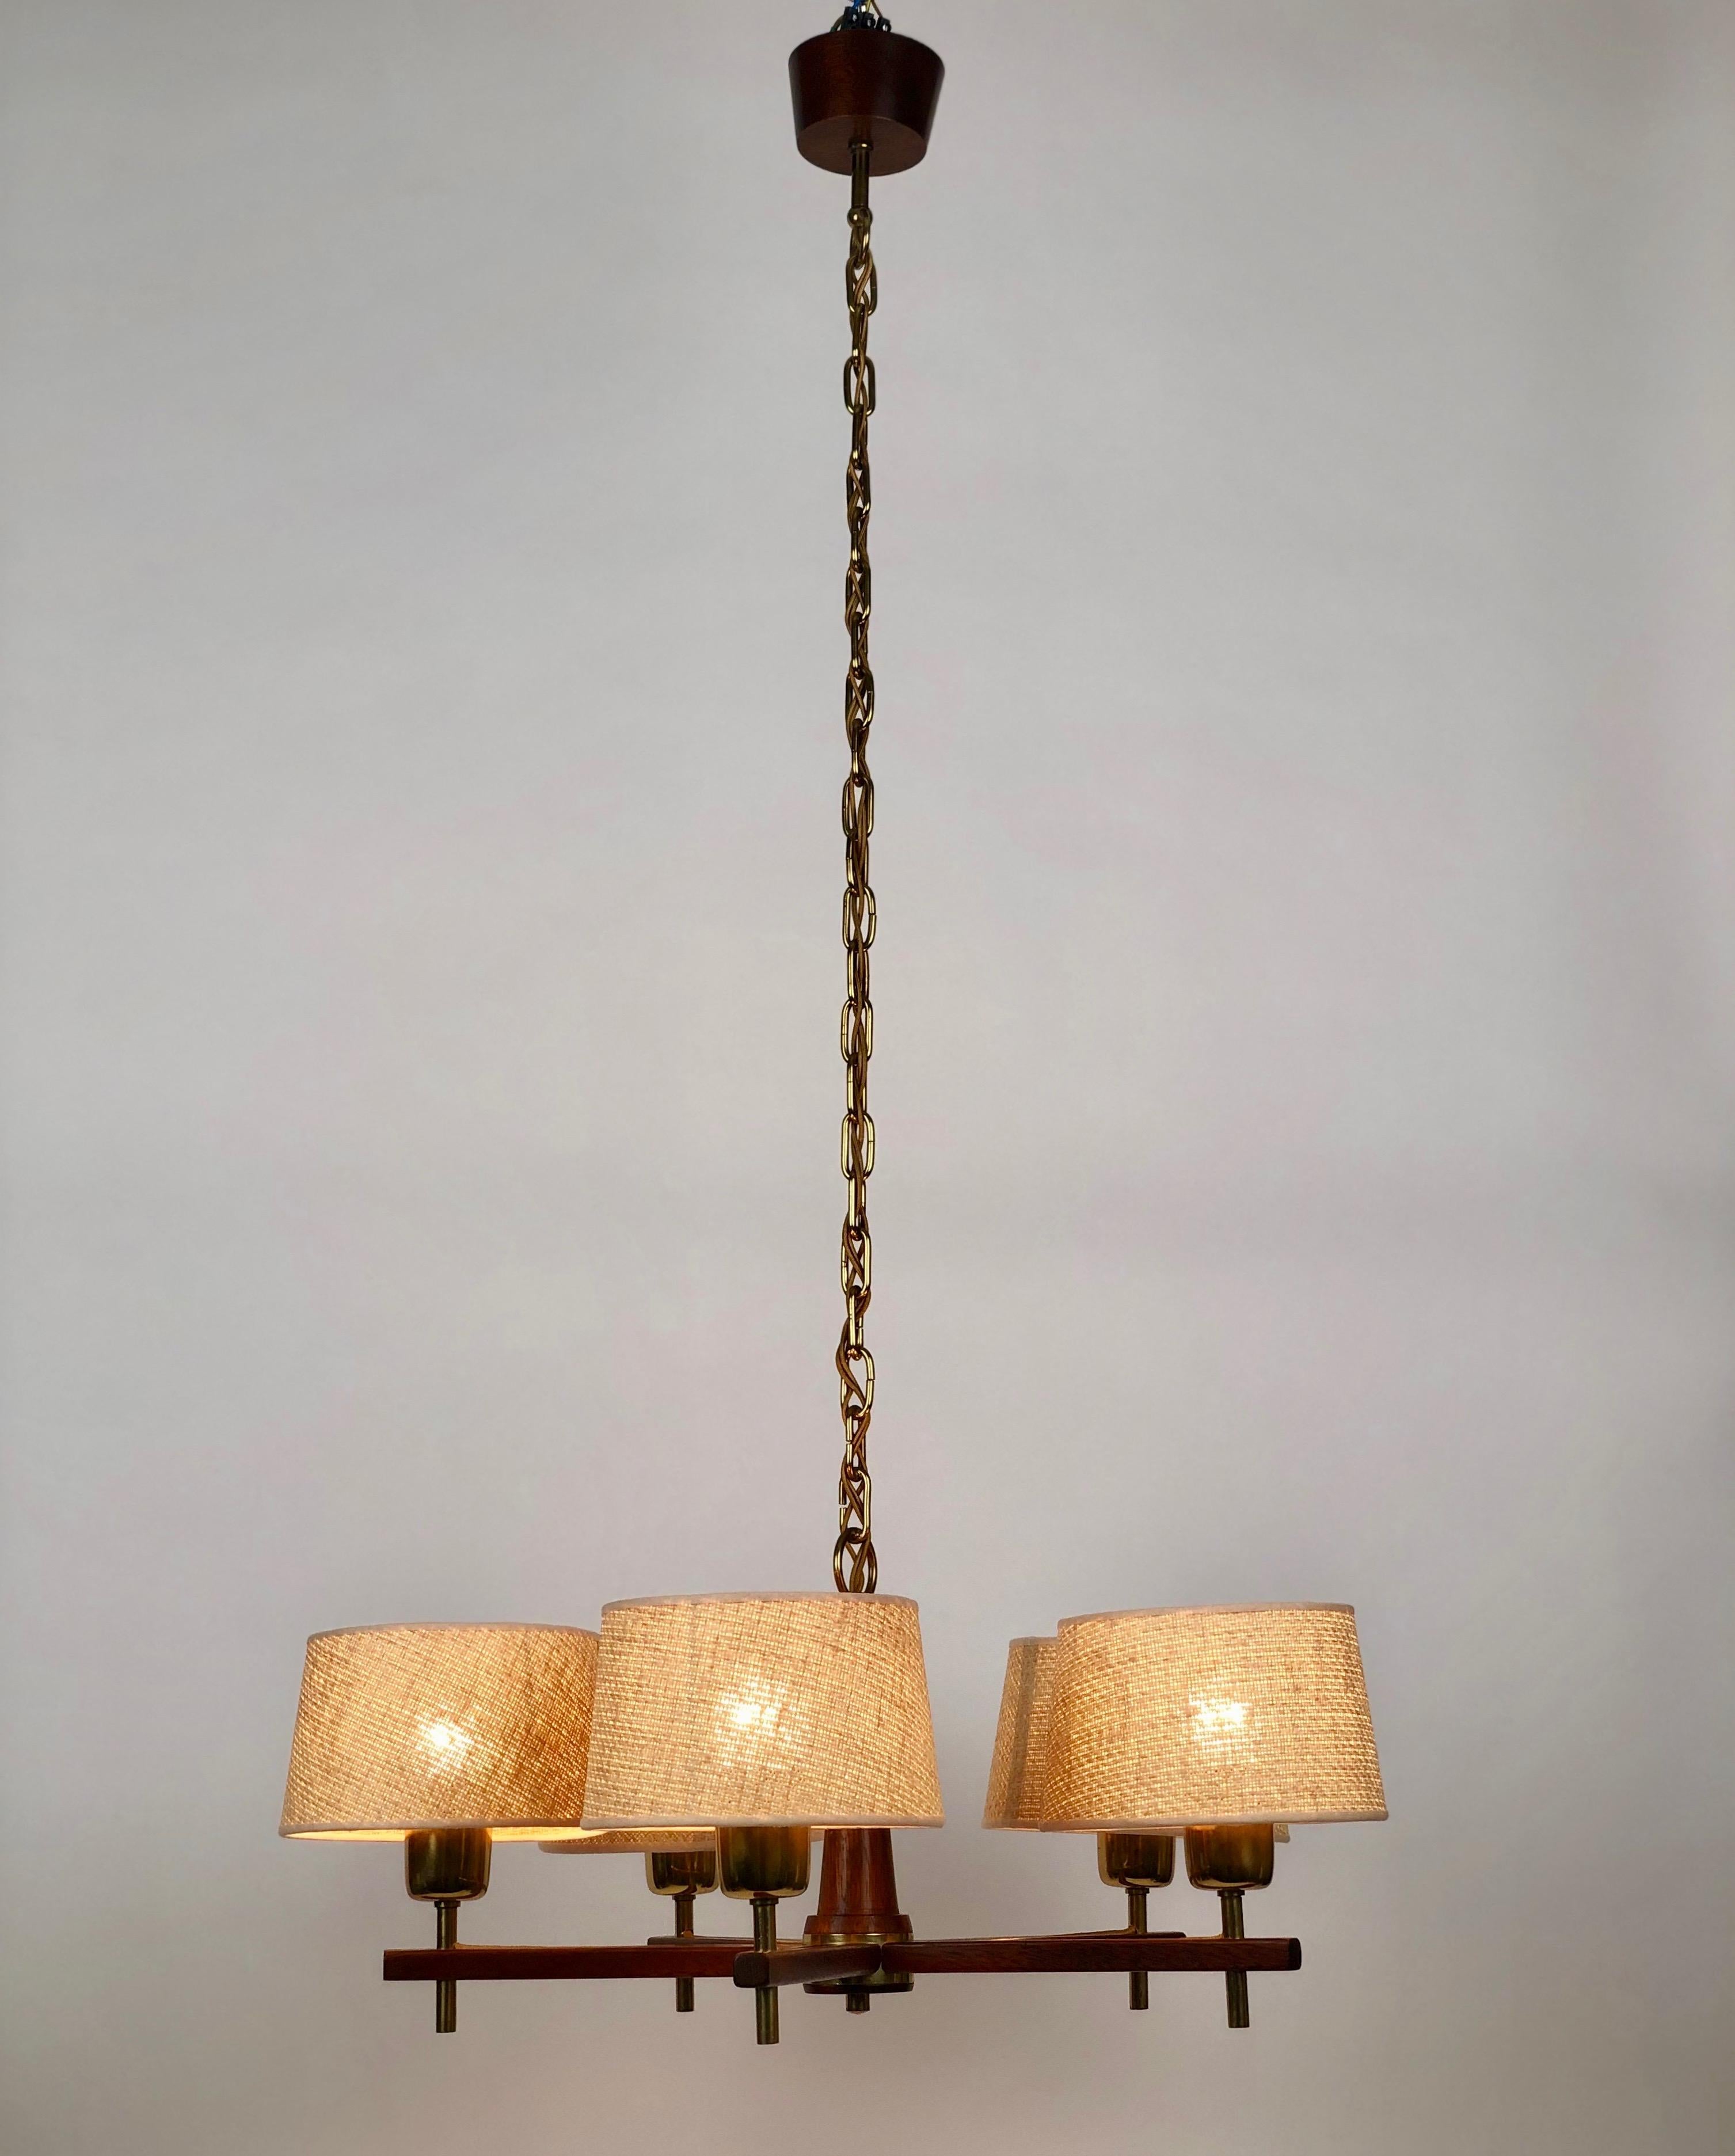 Five Arms Chandelier in Teak Wood and Brass with Cane Shades, 1960, Austria For Sale 6